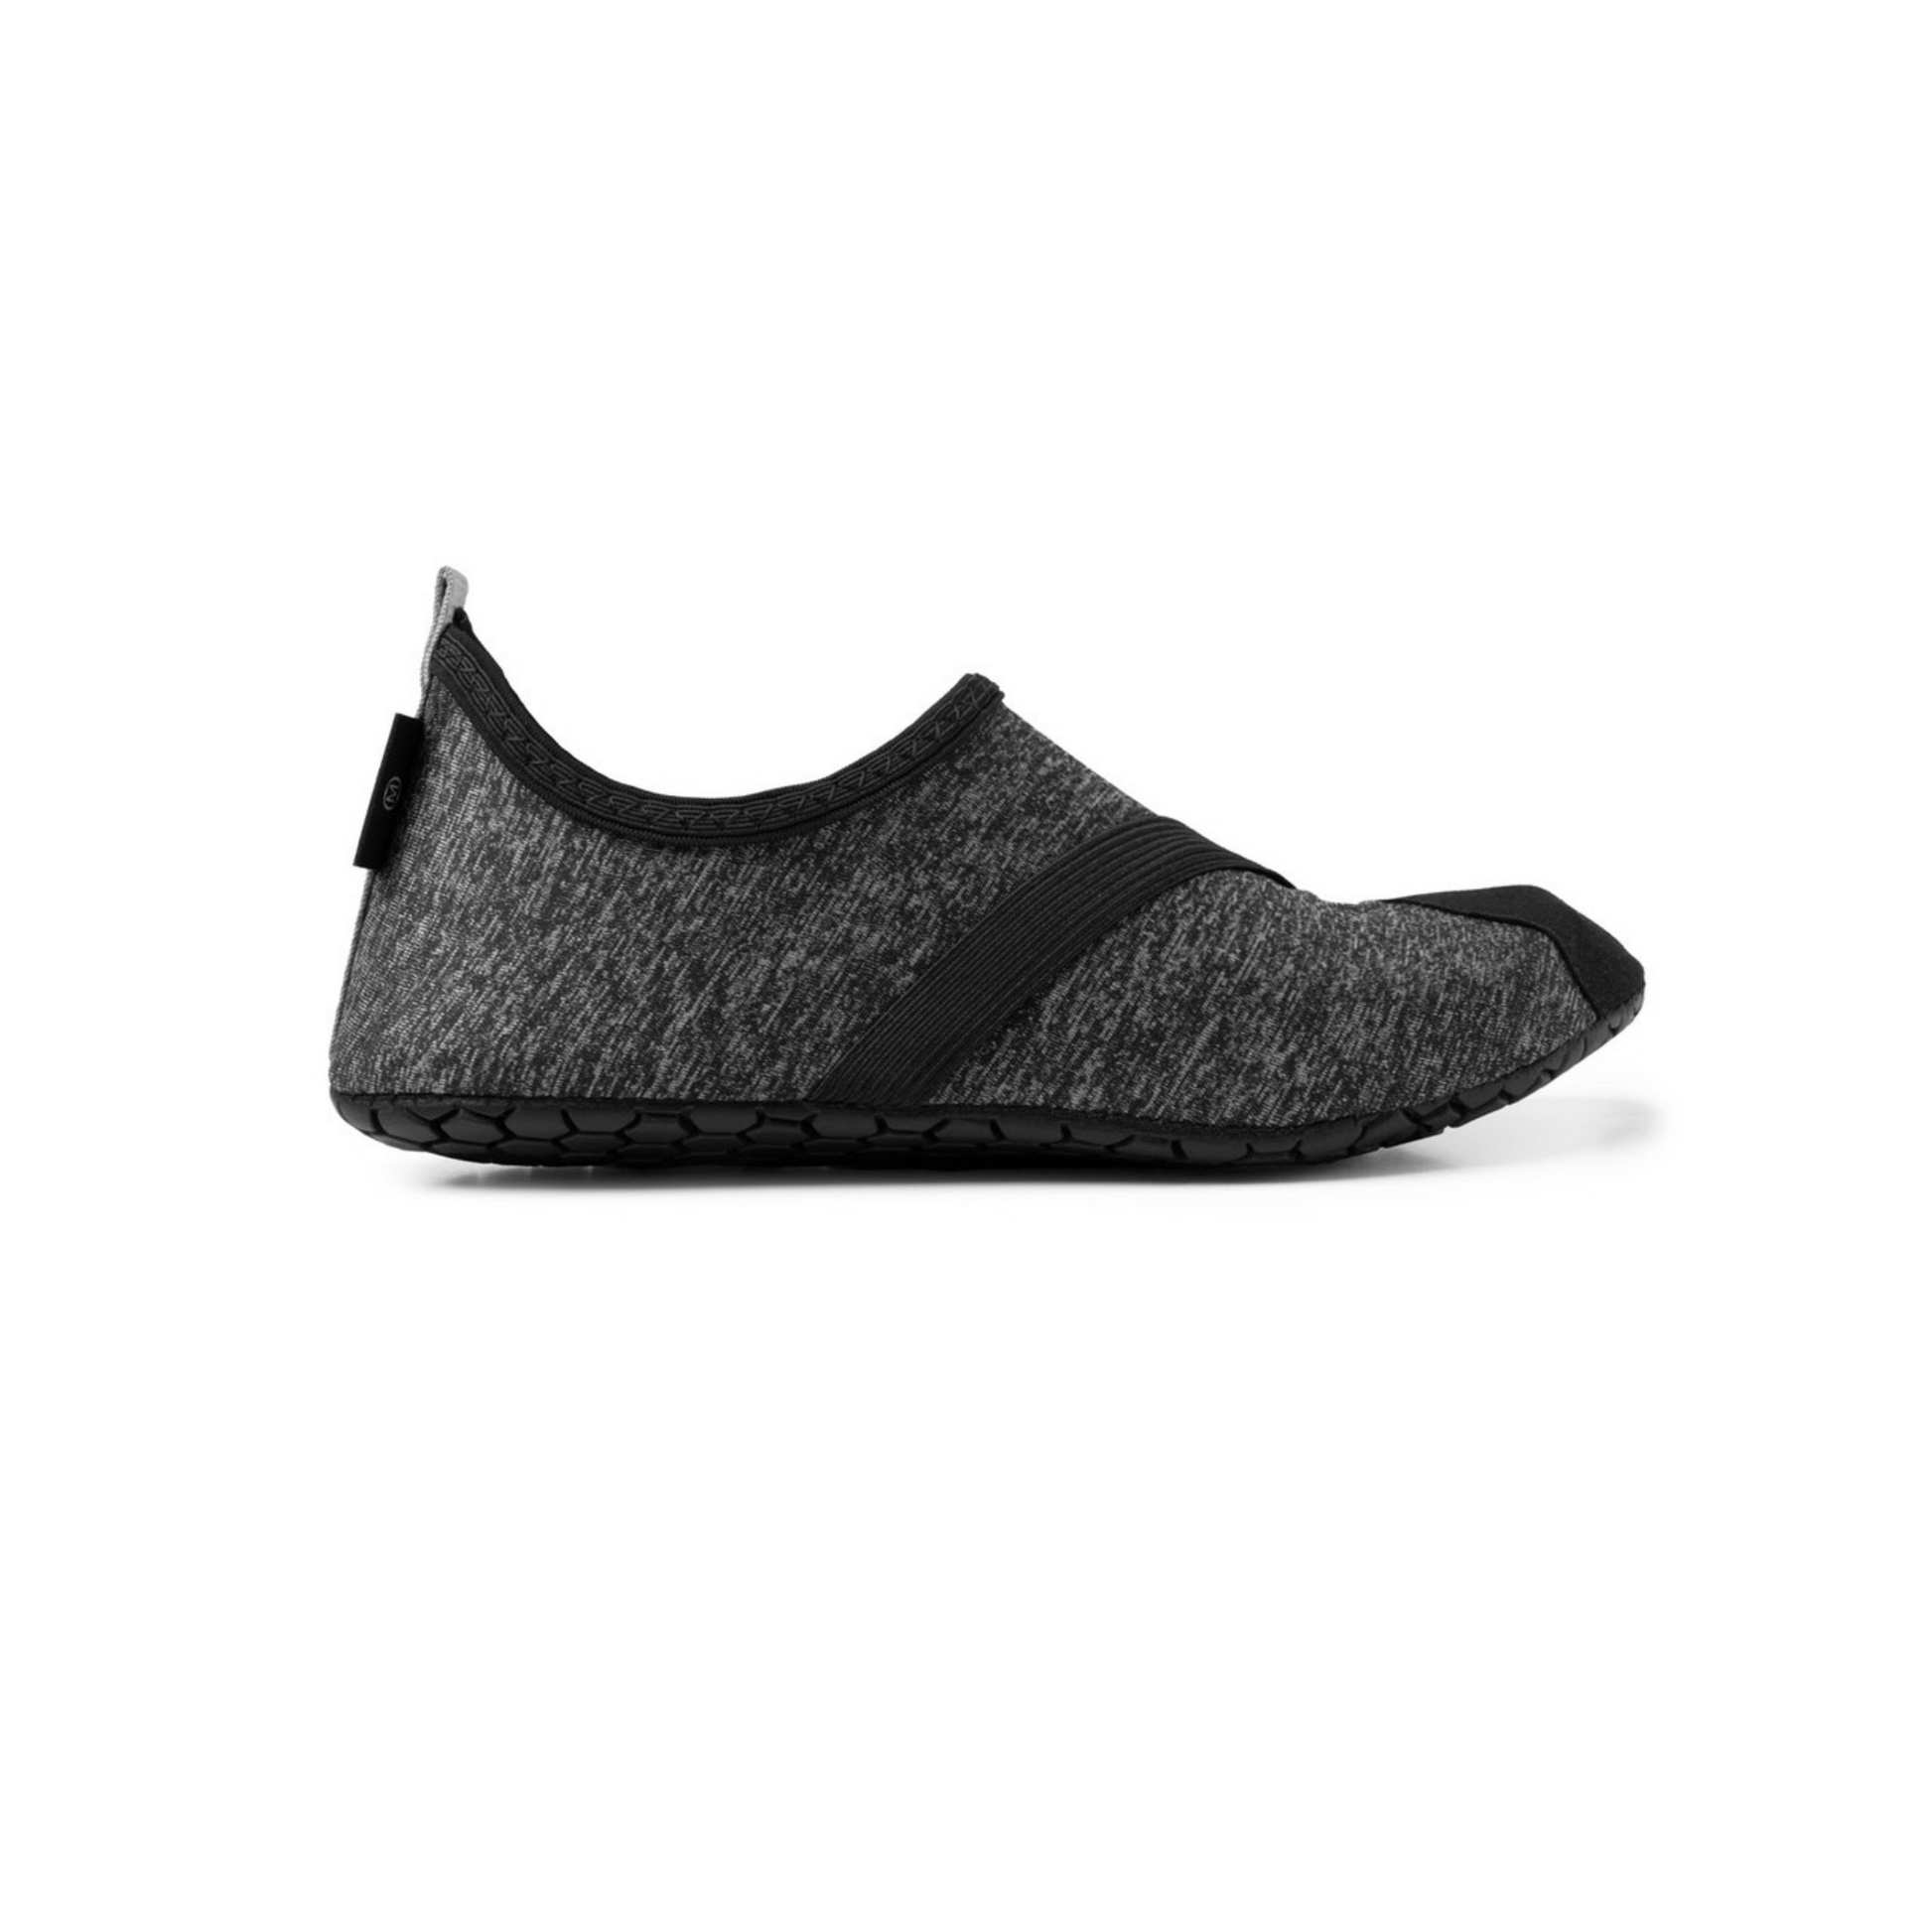 heather black fitkick active footwear